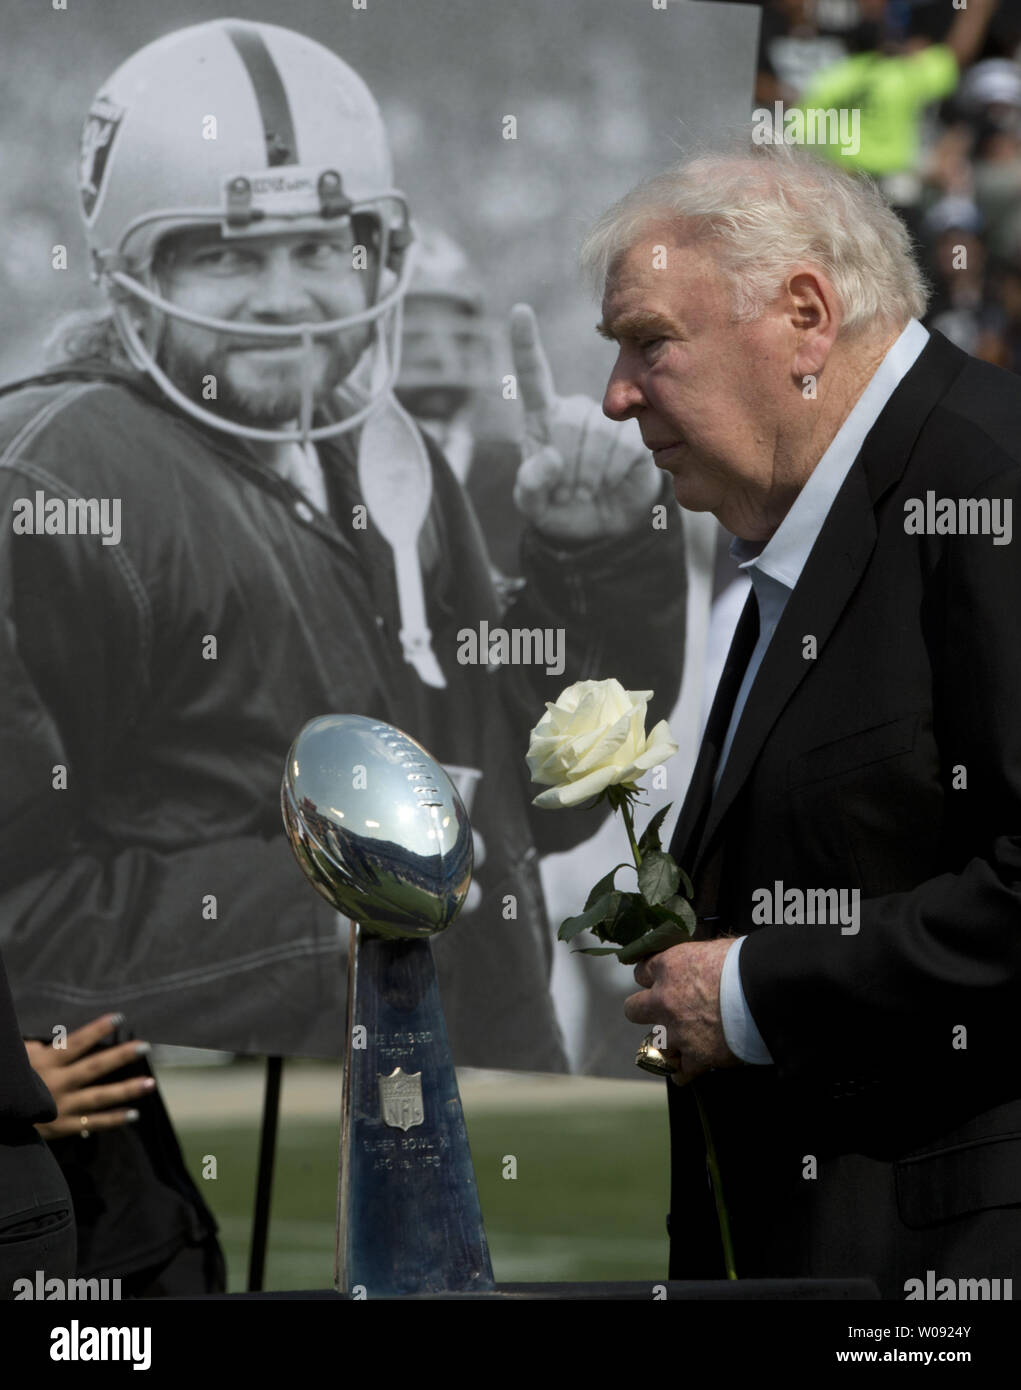 Former Oakland Raiders coach and sportscaster John Madden carries a white rose at a halftime tribute to the late Ken Stabler at O.co Coliseum in Oakland, California on September 13, 2015. Stabler, who helped Madden win Super Bowl XI  and the Vince Lombardi Trophy in the foreground, died in July, 2015. Photo by Terry Schmitt/UPI Stock Photo